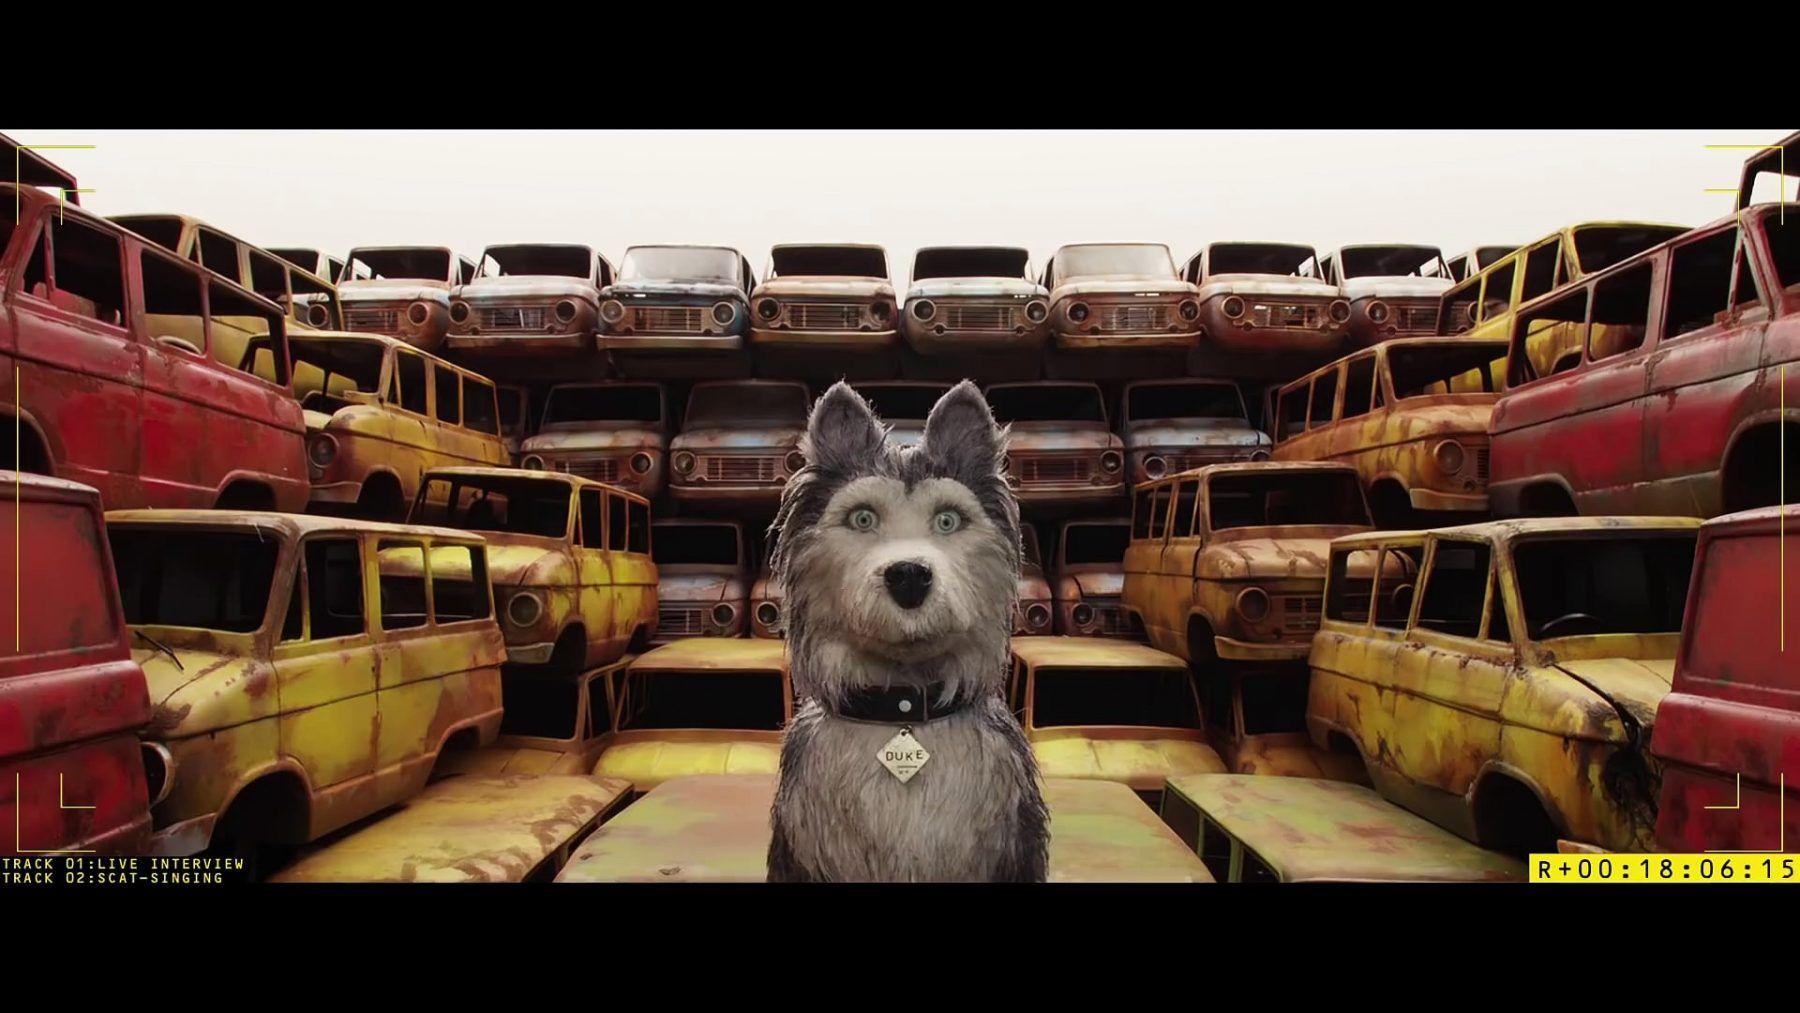 Isle Of Dogs Wallpapers - Wallpaper Cave